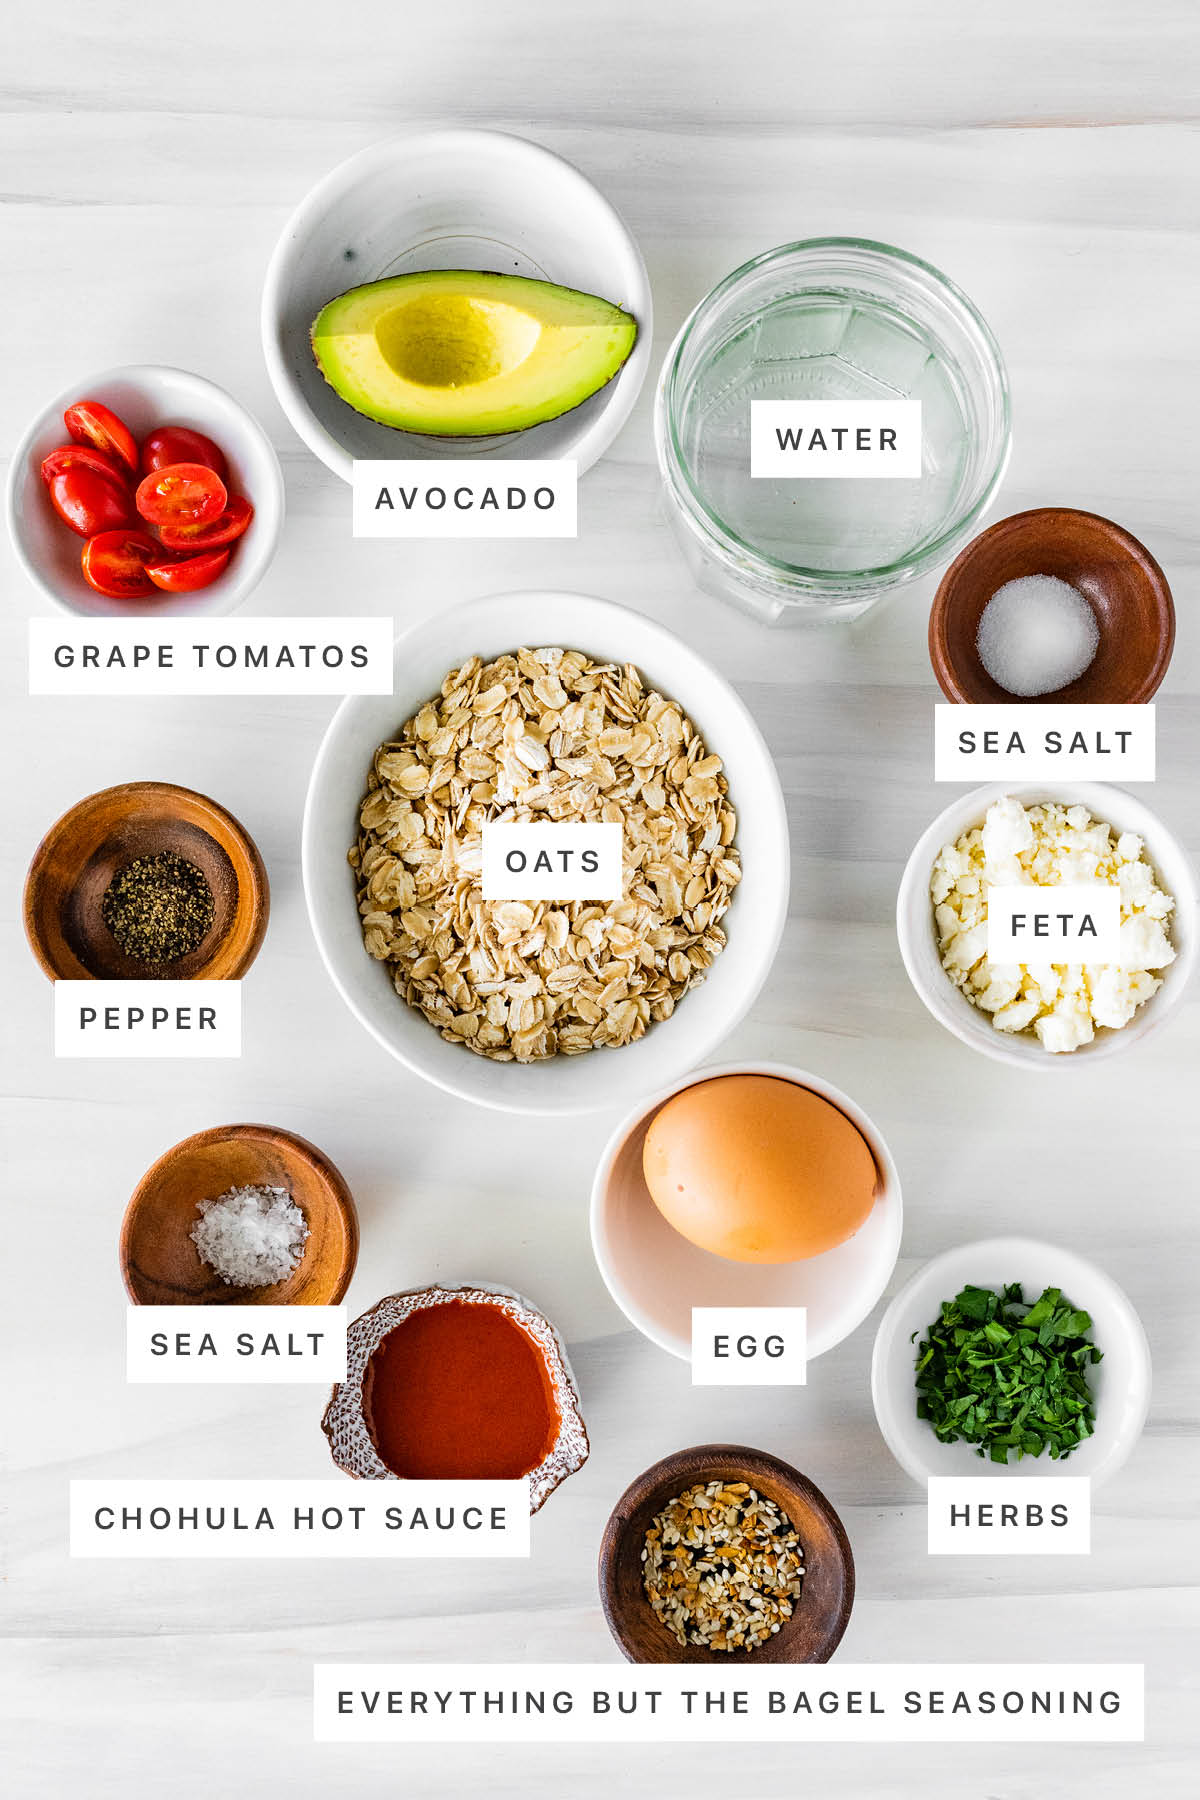 Ingredients measured out to make Savory Oatmeal: avocado, water, grape tomatoes, oats, sea salt, pepper, feta, egg, Chohula hot sauce, everything but the bagel seasoning and herbs.